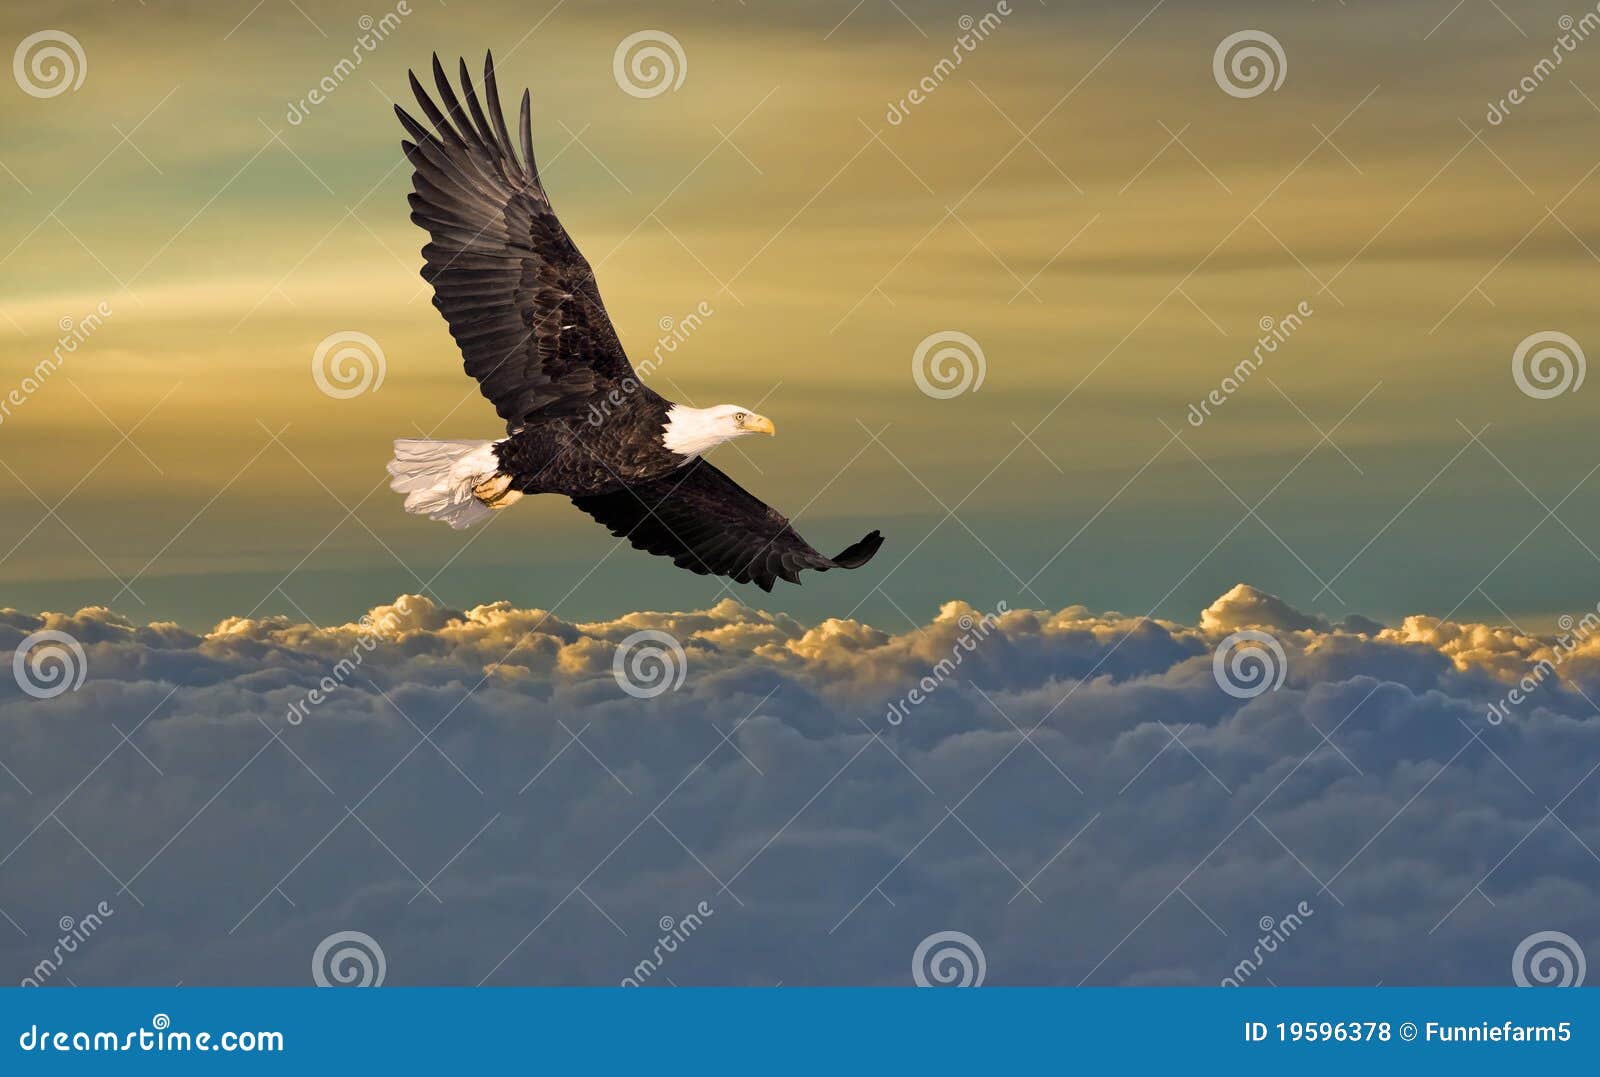 bald eagle flying above the clouds